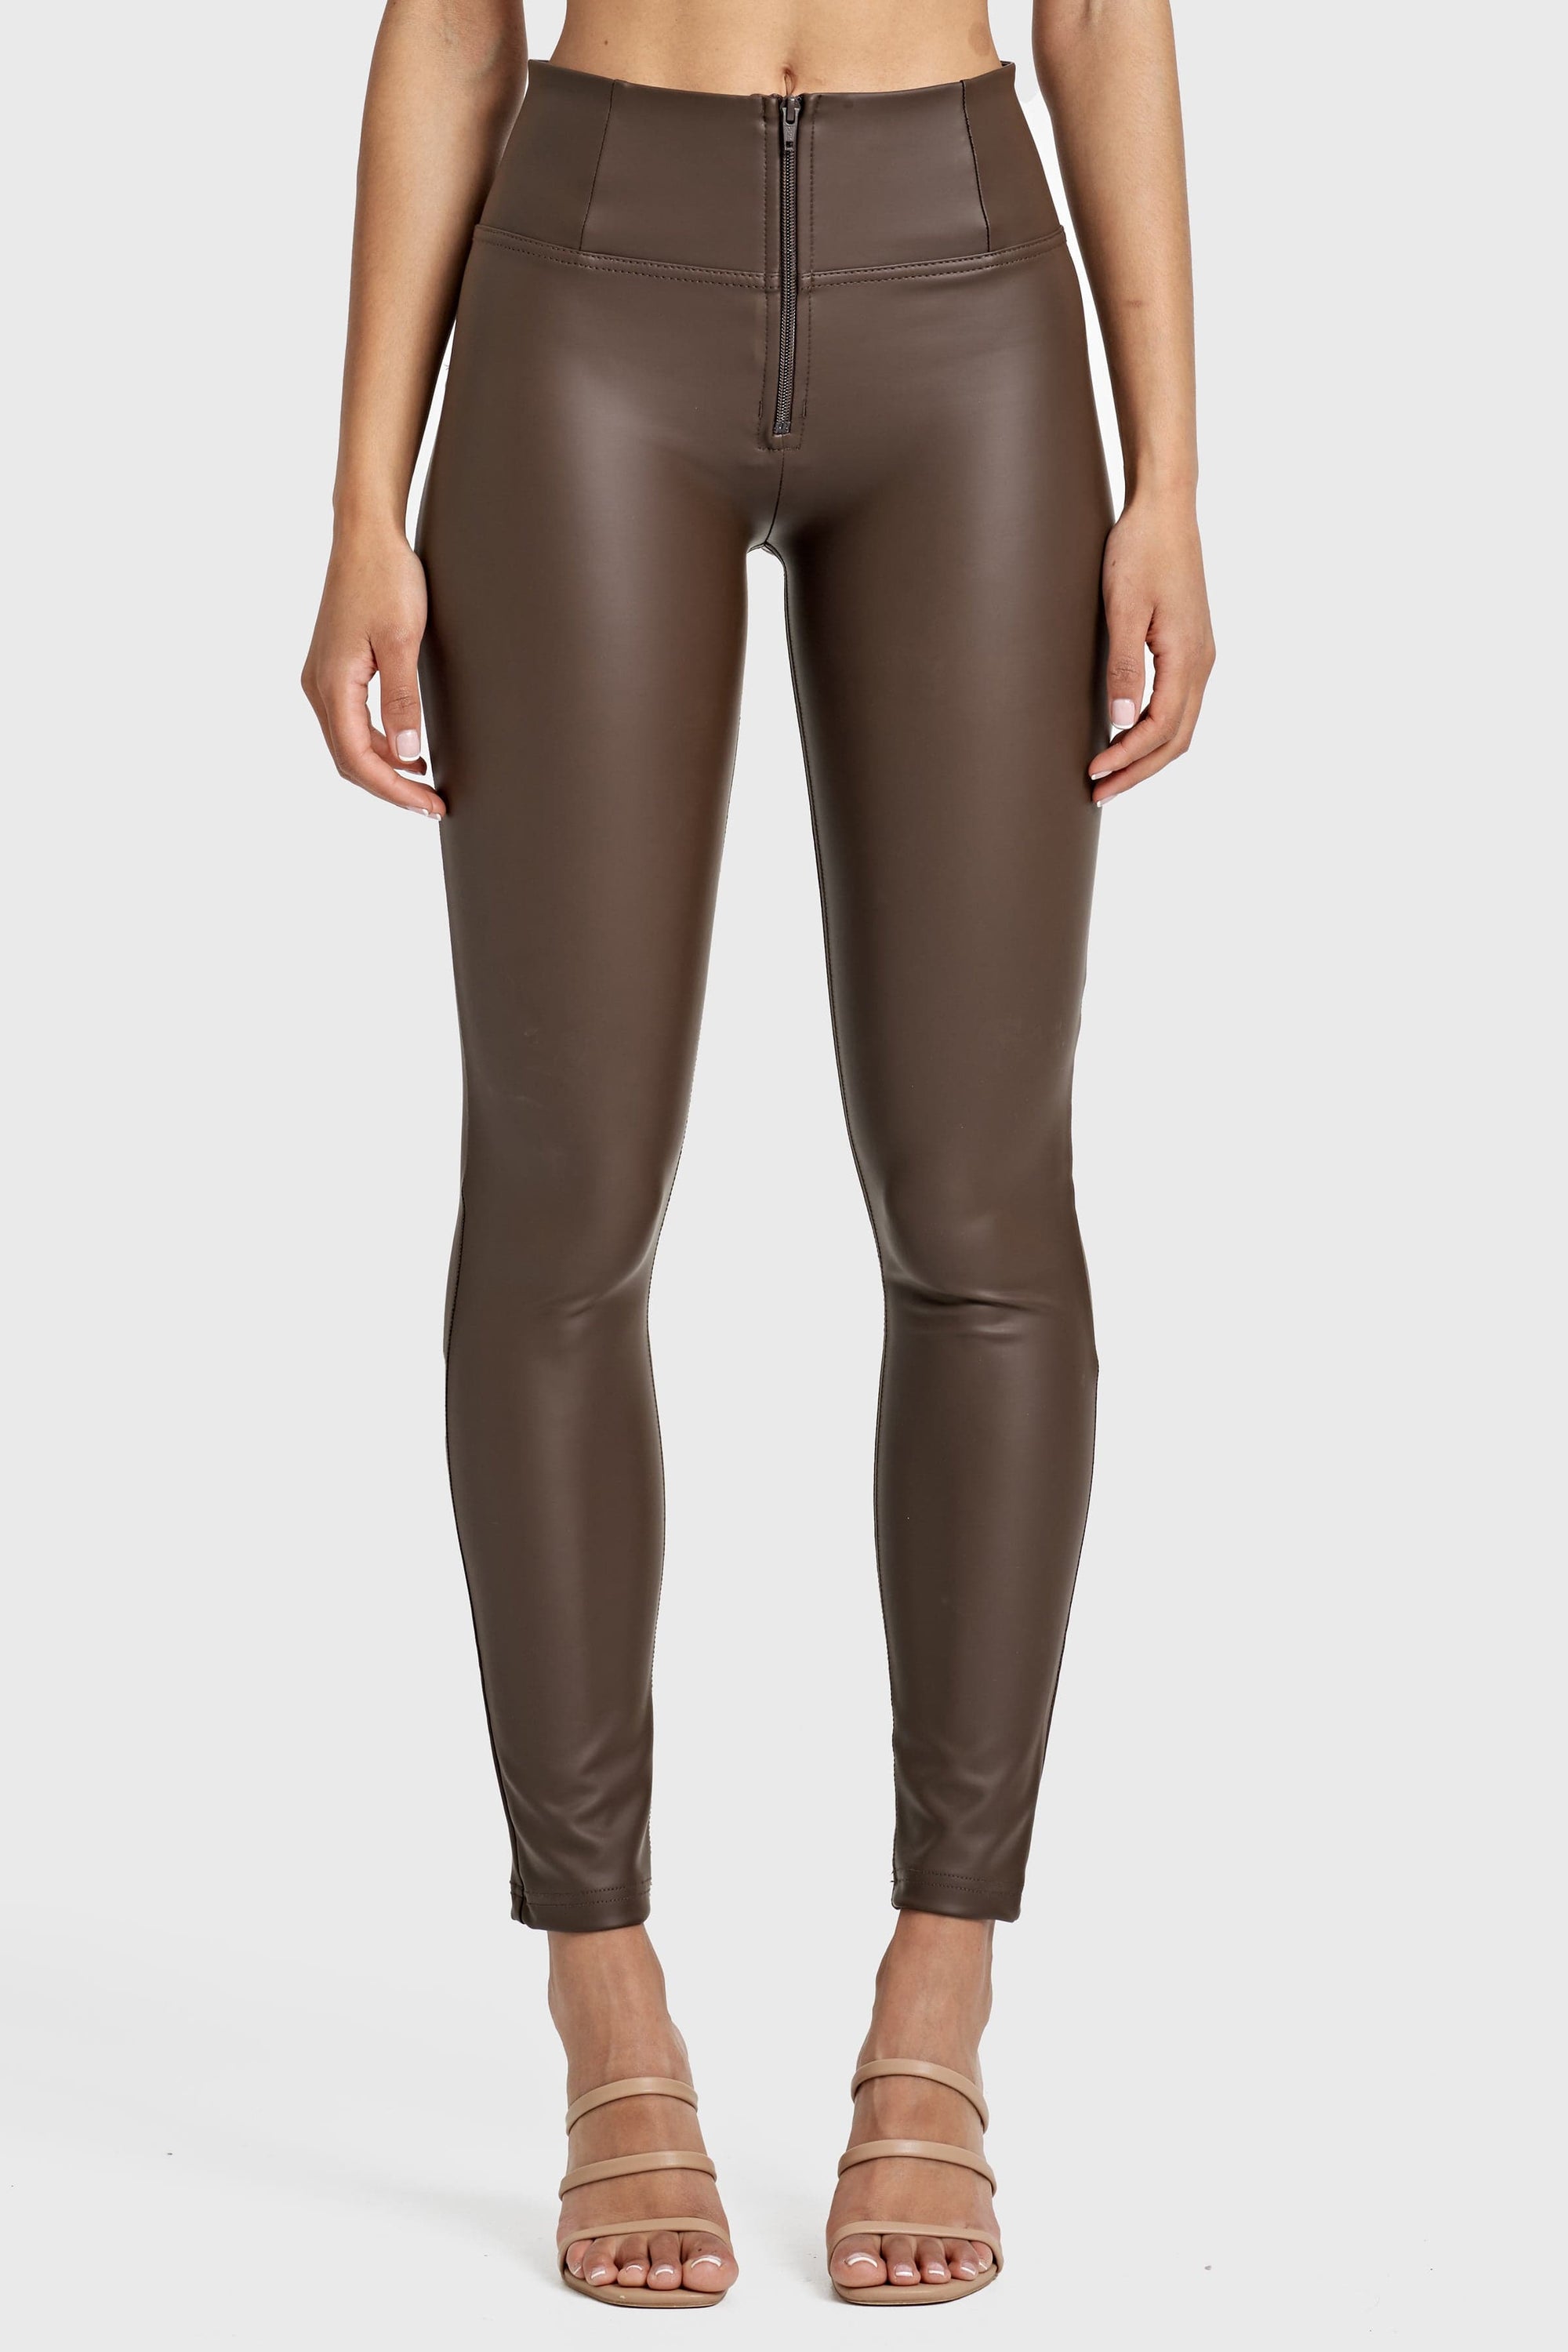 WR.UP® Faux Leather - High Waisted - Full Length - Chocolate 8